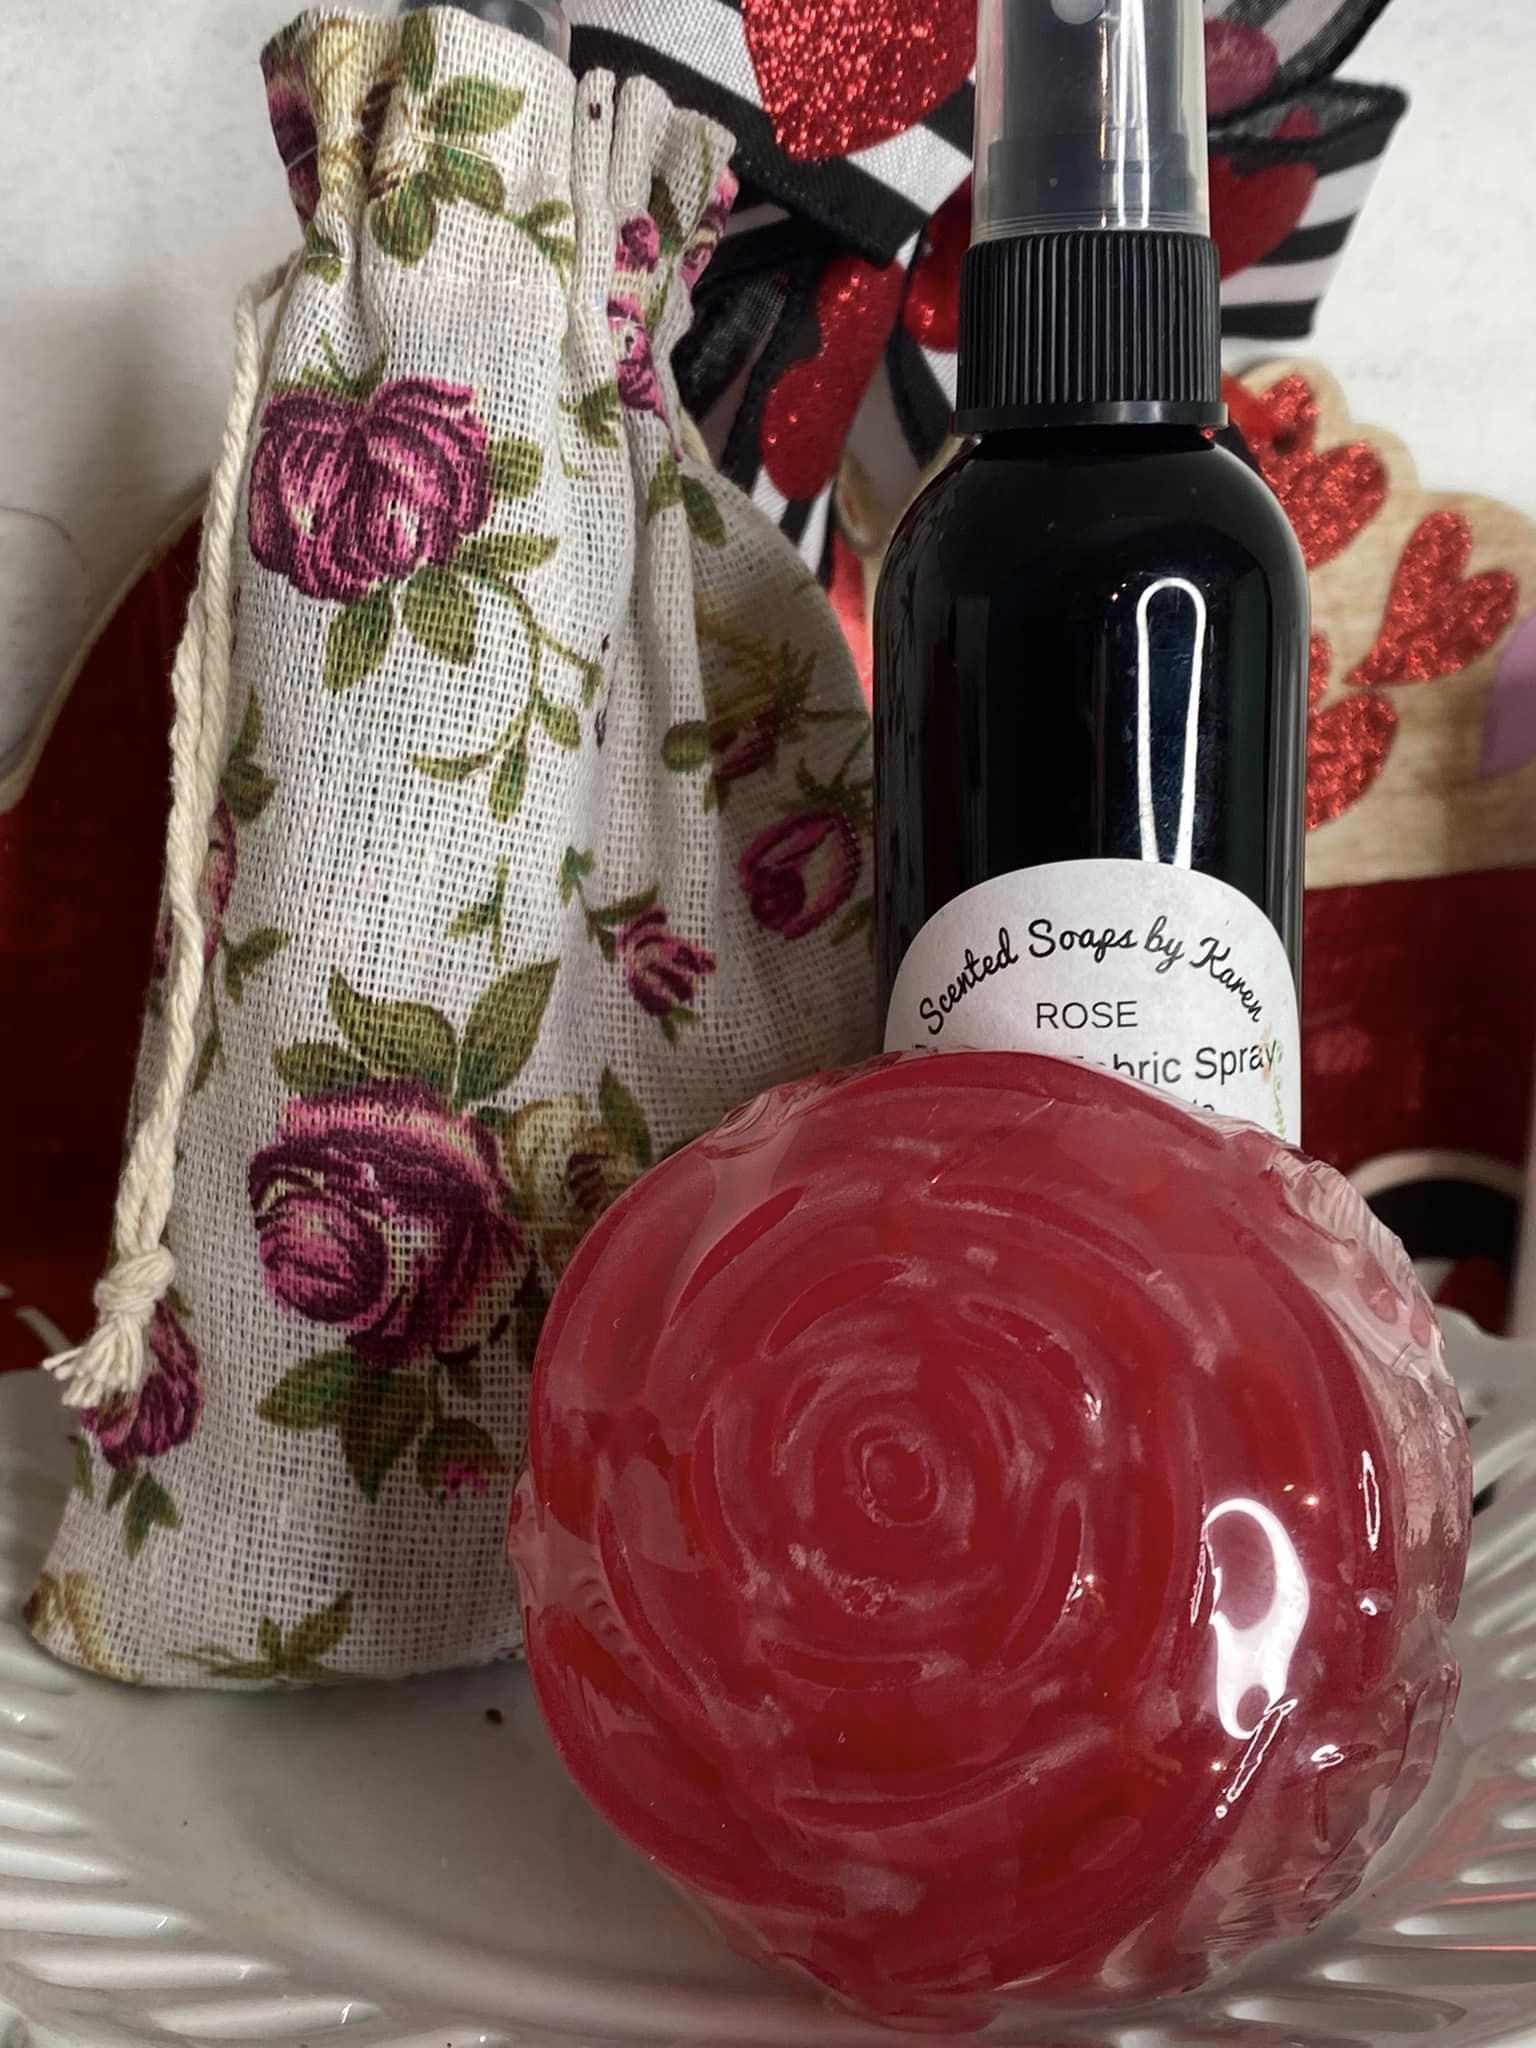 Rose Glycerin Soap. Rose Room and Fabric Natural Neutralizer Spray. Products are tucked into a rose burlap bag with ties.